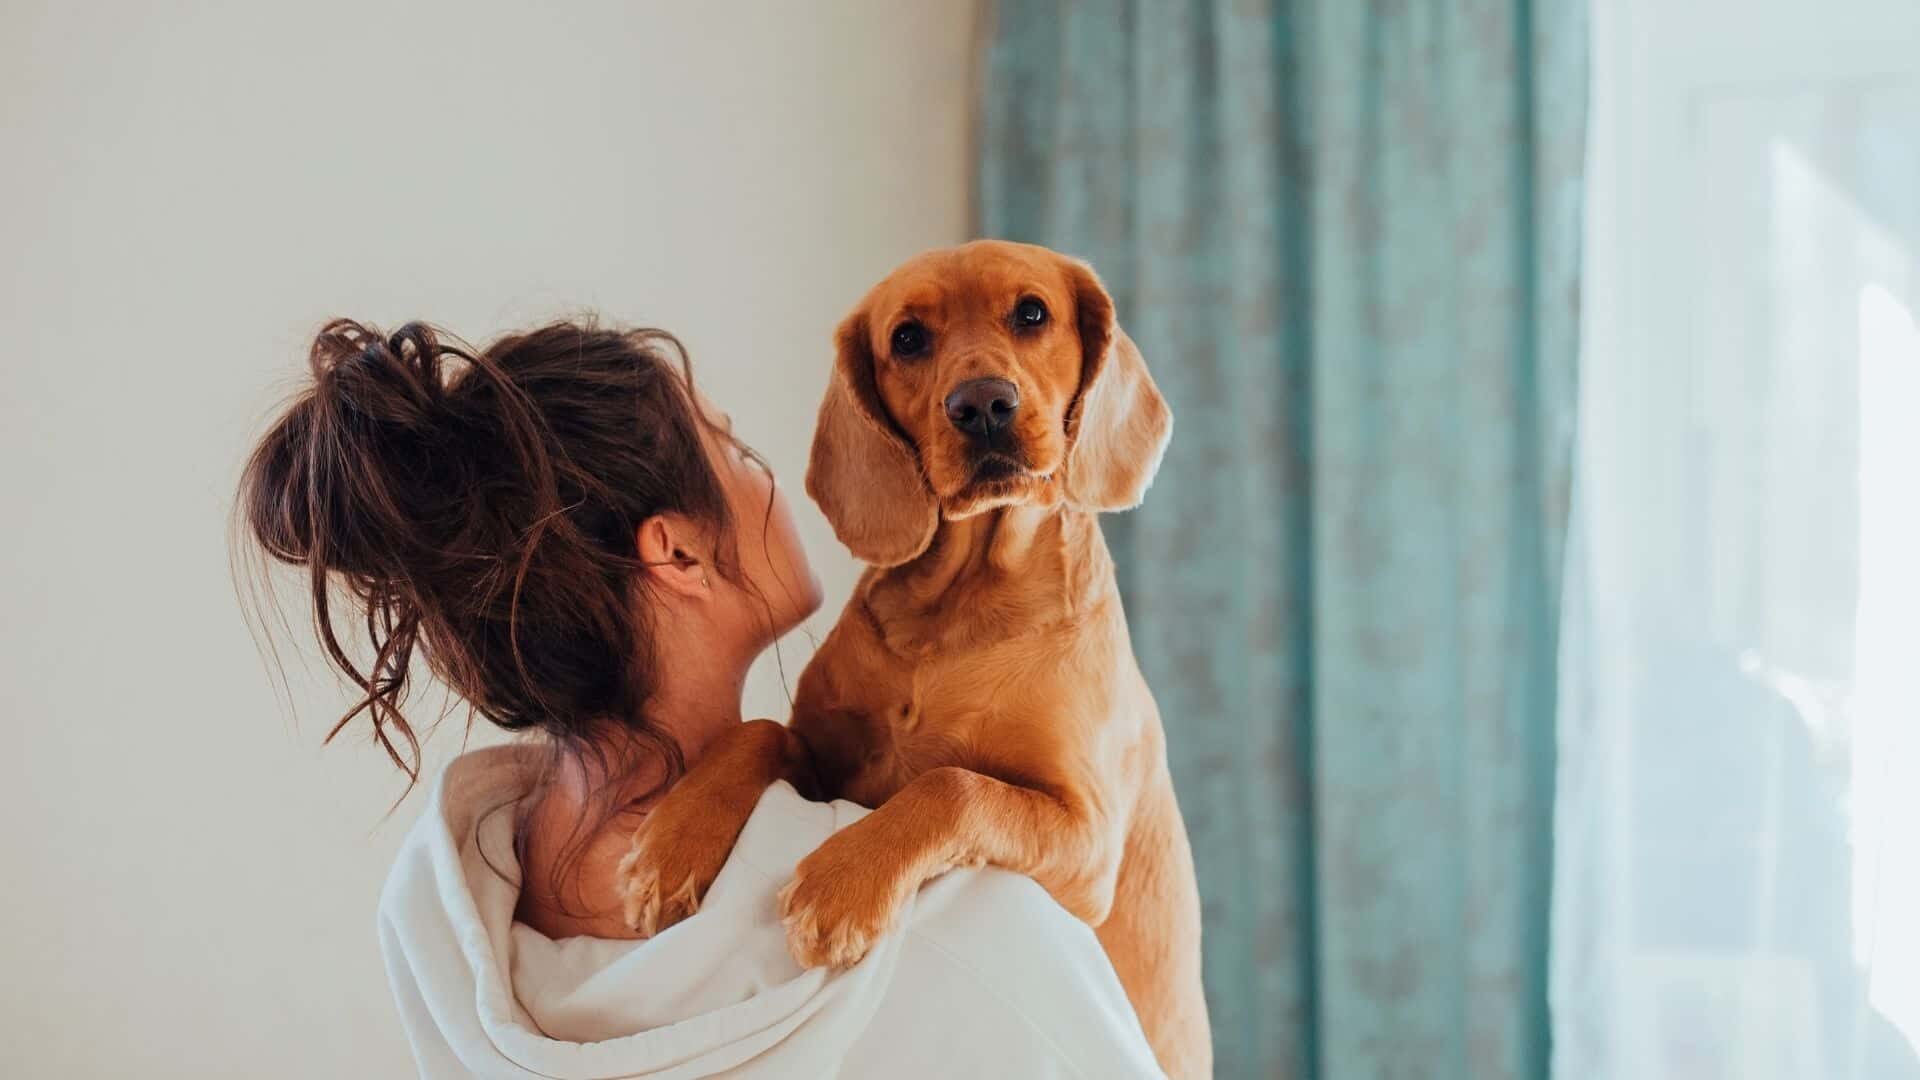 Getting a dog without telling husband